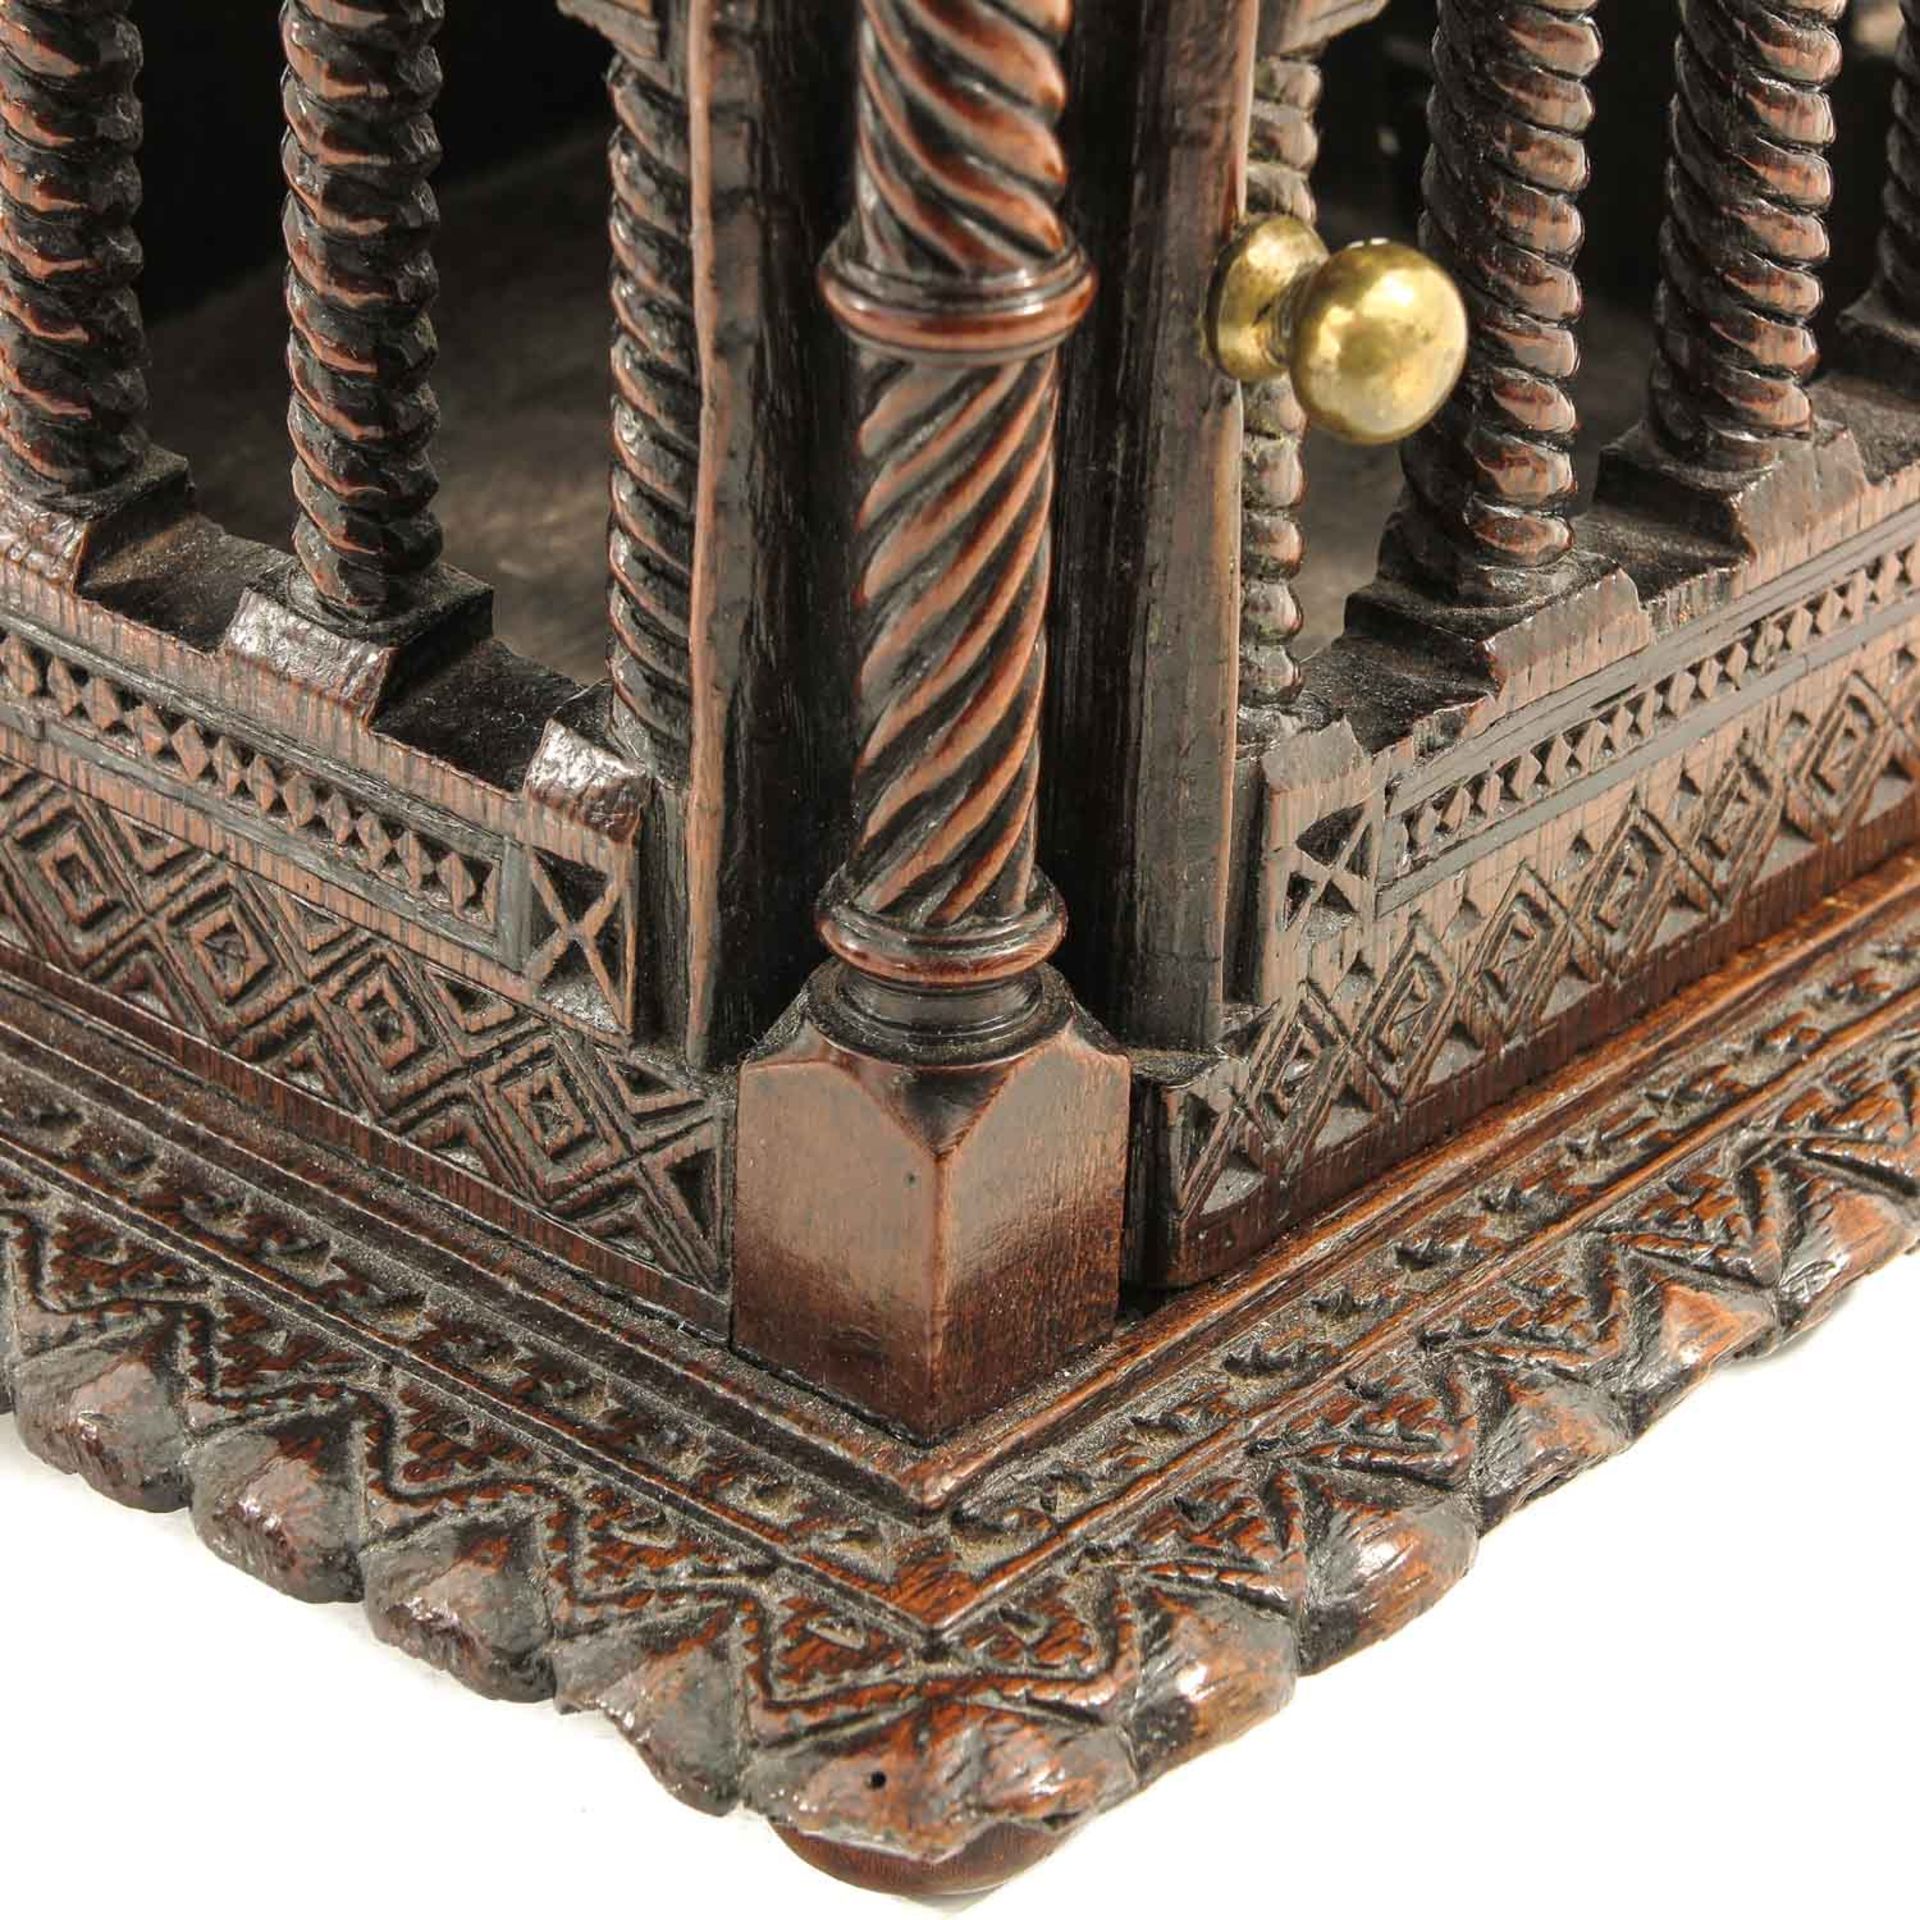 A Carved Wood Stove - Image 8 of 9